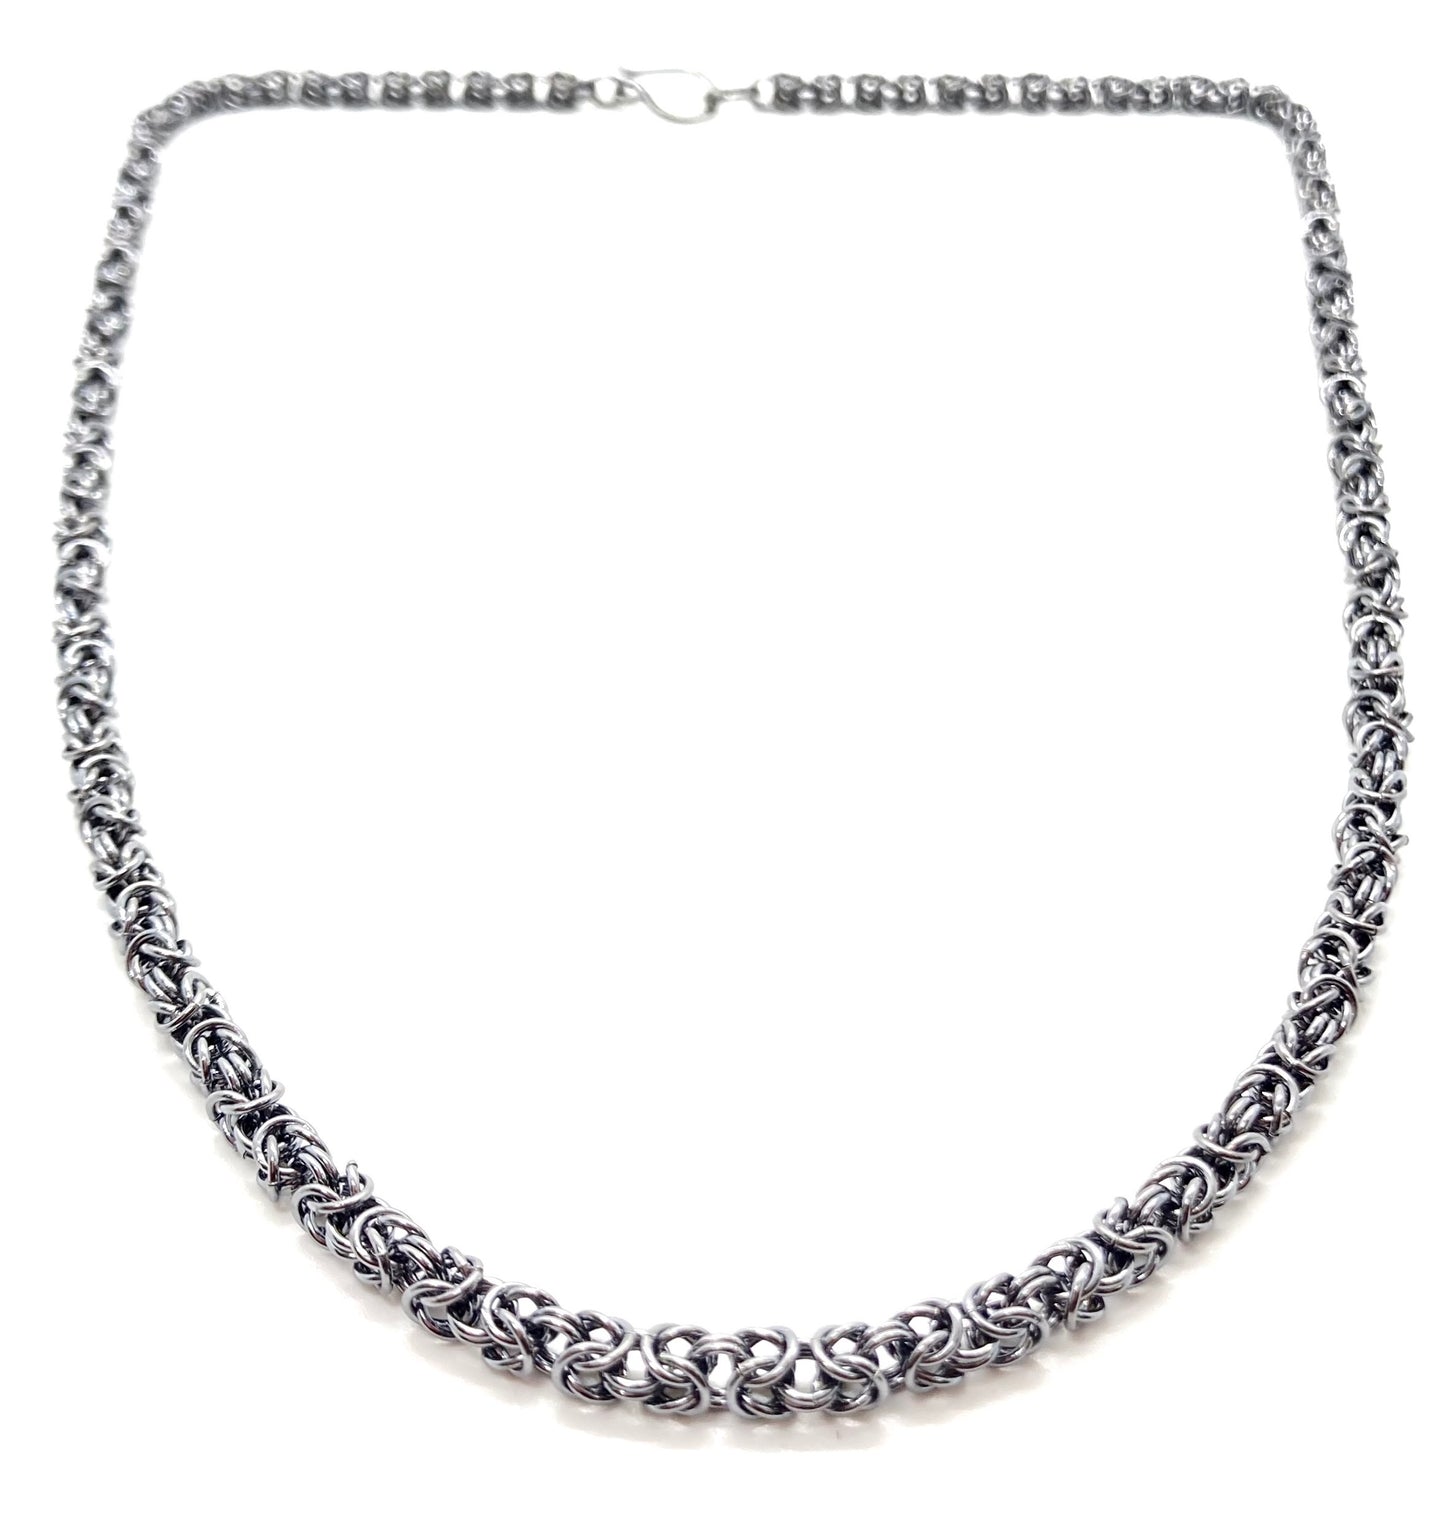 Delicate Byzantine Chainmaille Necklace in Oxidized Silver